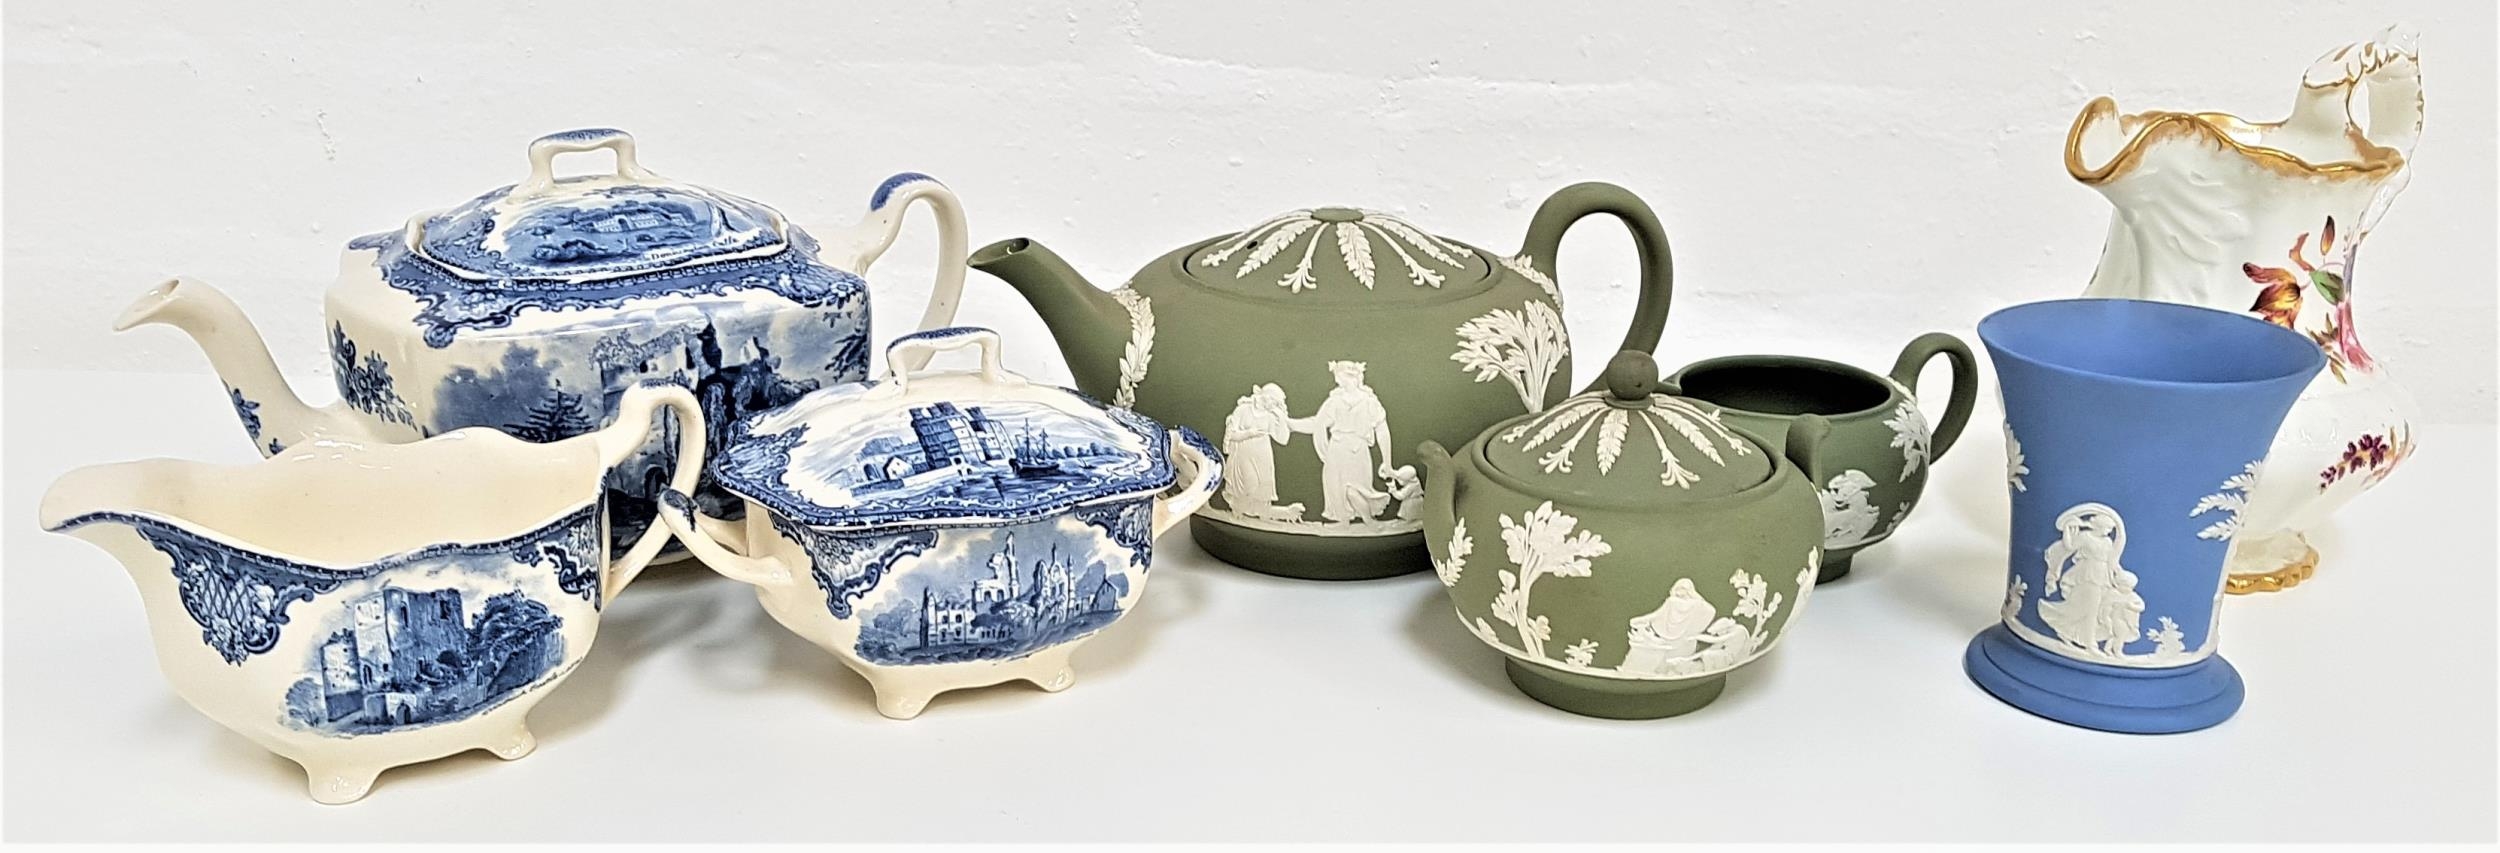 SELECTION OF WEDGWOOD GREEN JASPERWARE including a teapot lacking finial to the lid, lidded sugar